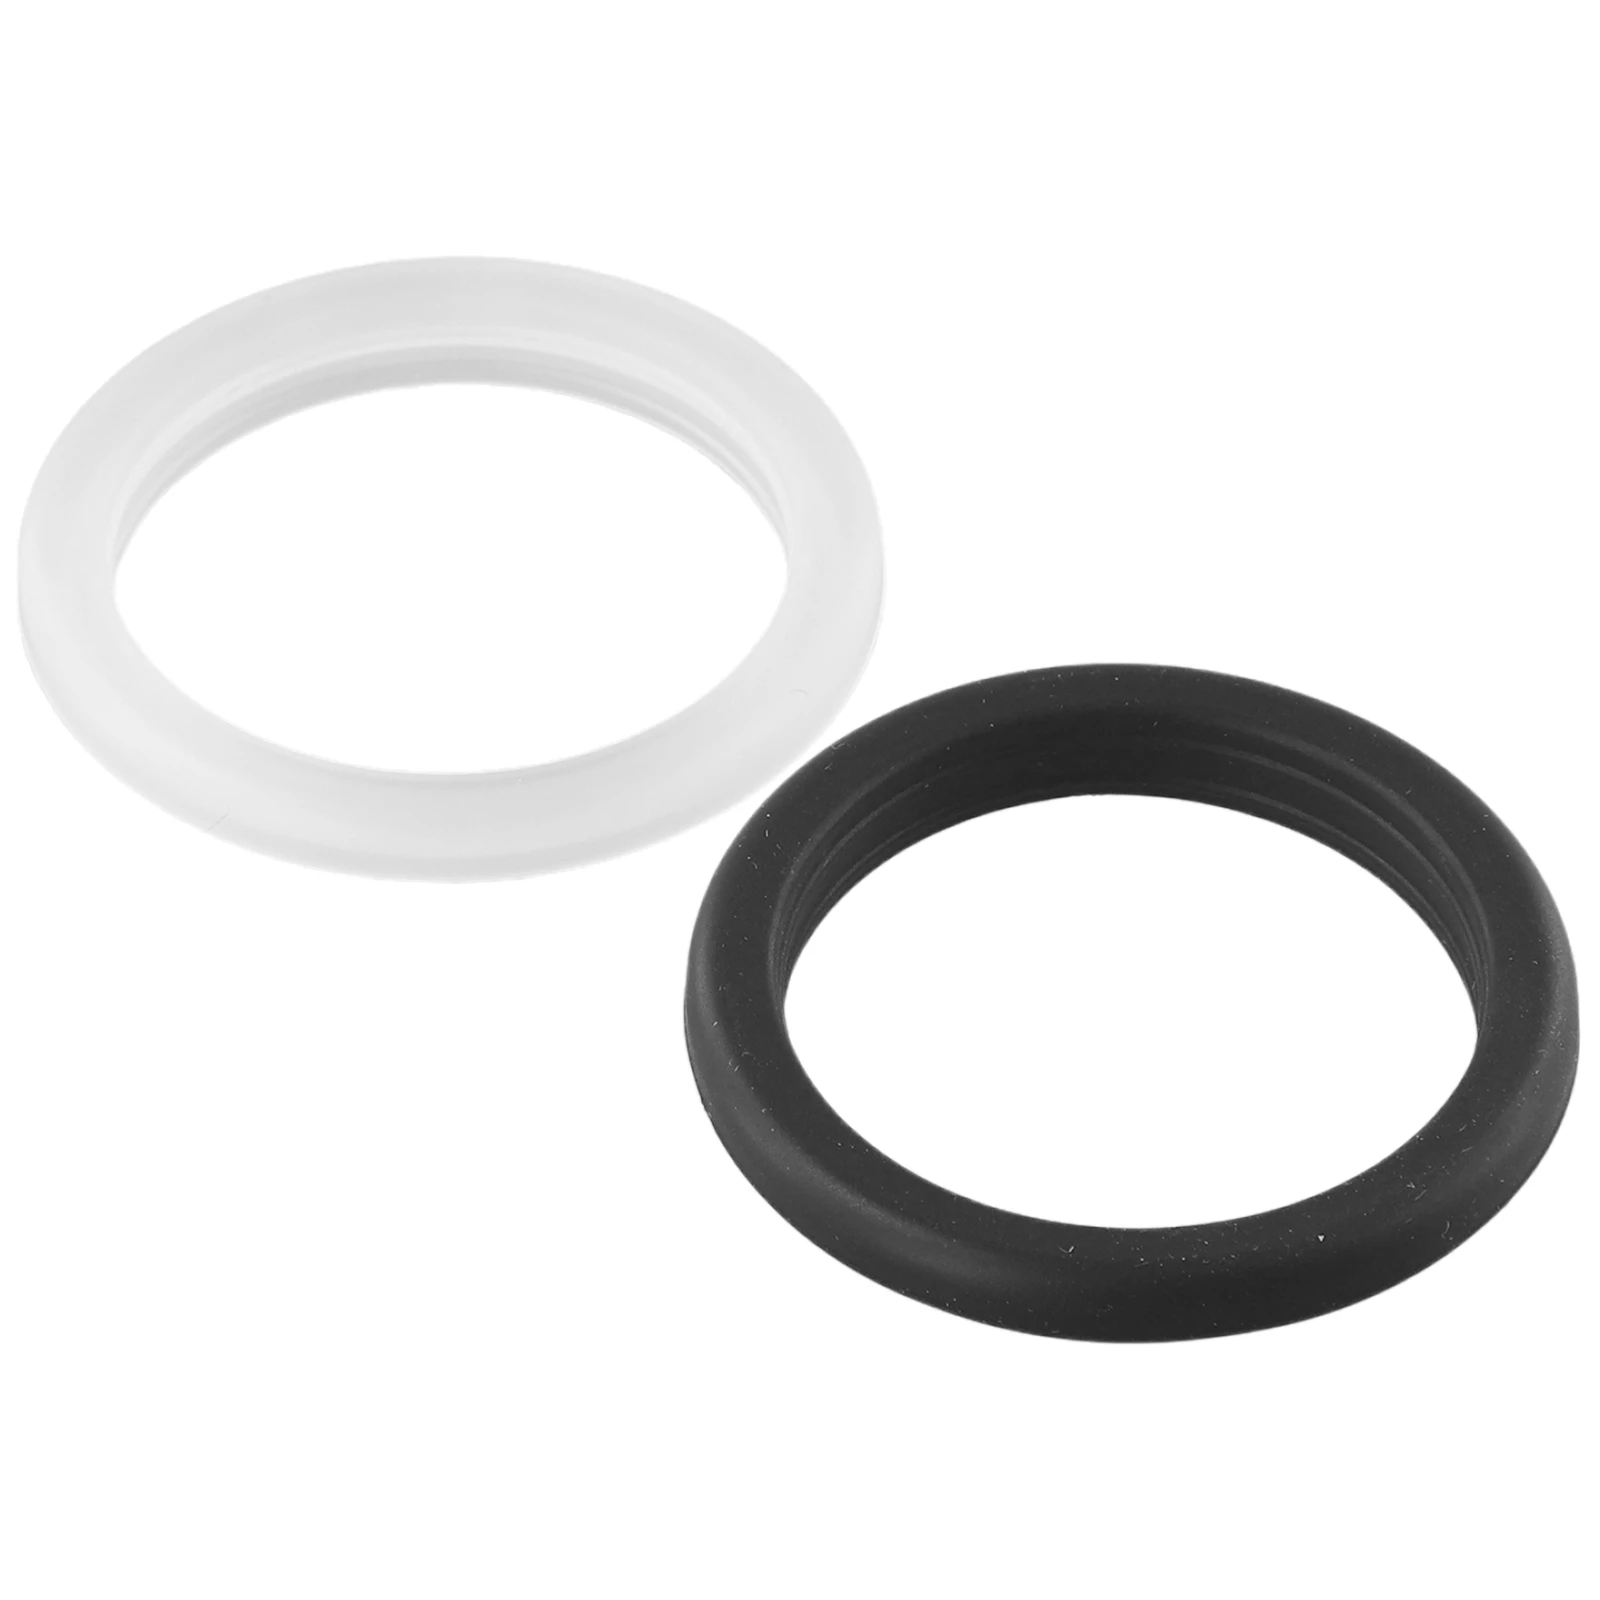 

1PC Filter Holder Gasket O-Ring Replacement For DeLonghi EC685/EC680 Family Of Espresso Machines Household Coffee Machine